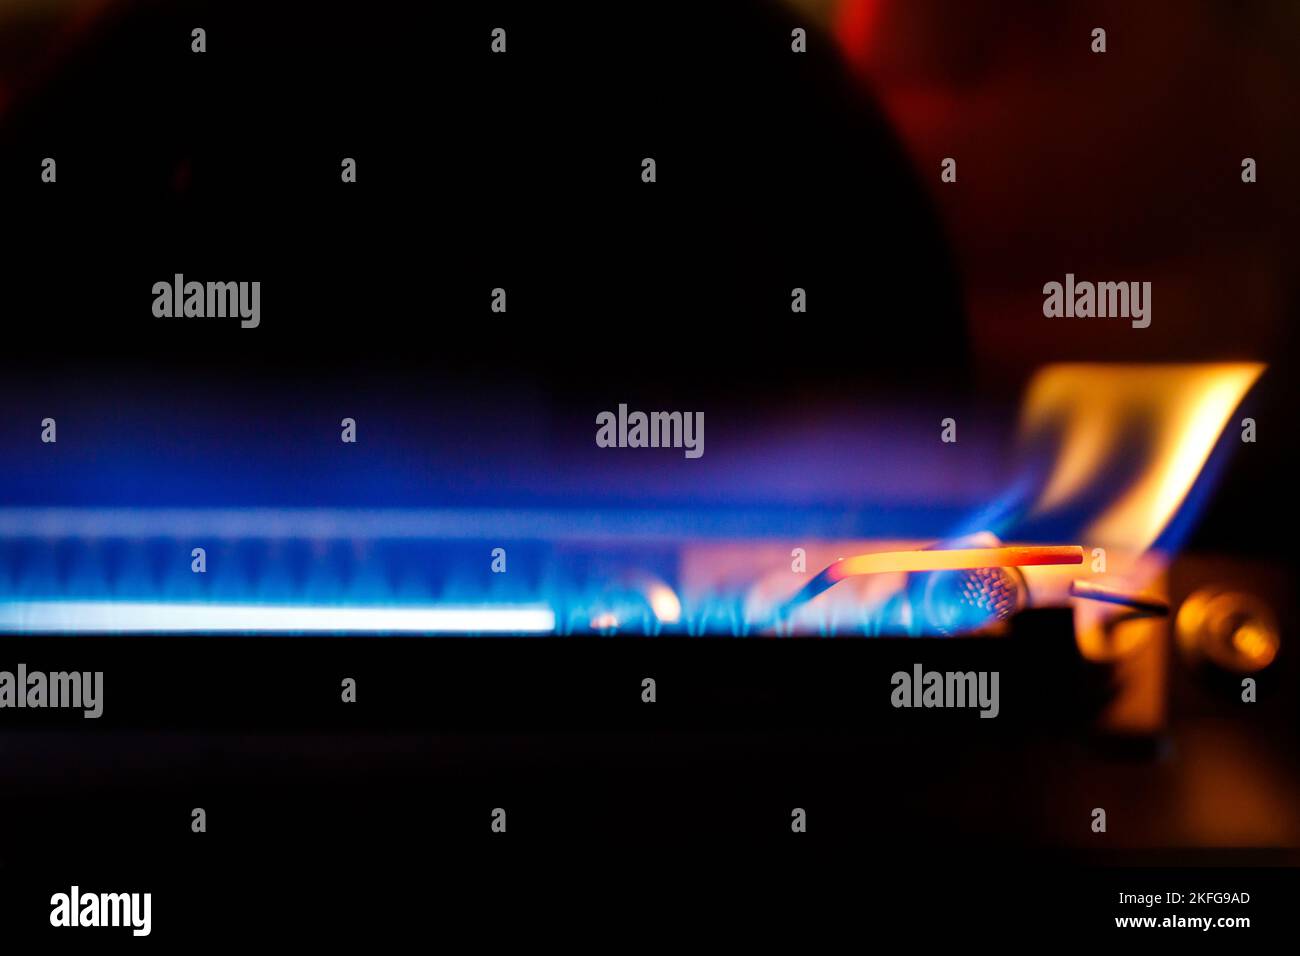 Gas boiler igniter. Gas is burning in the boiler. Stock Photo